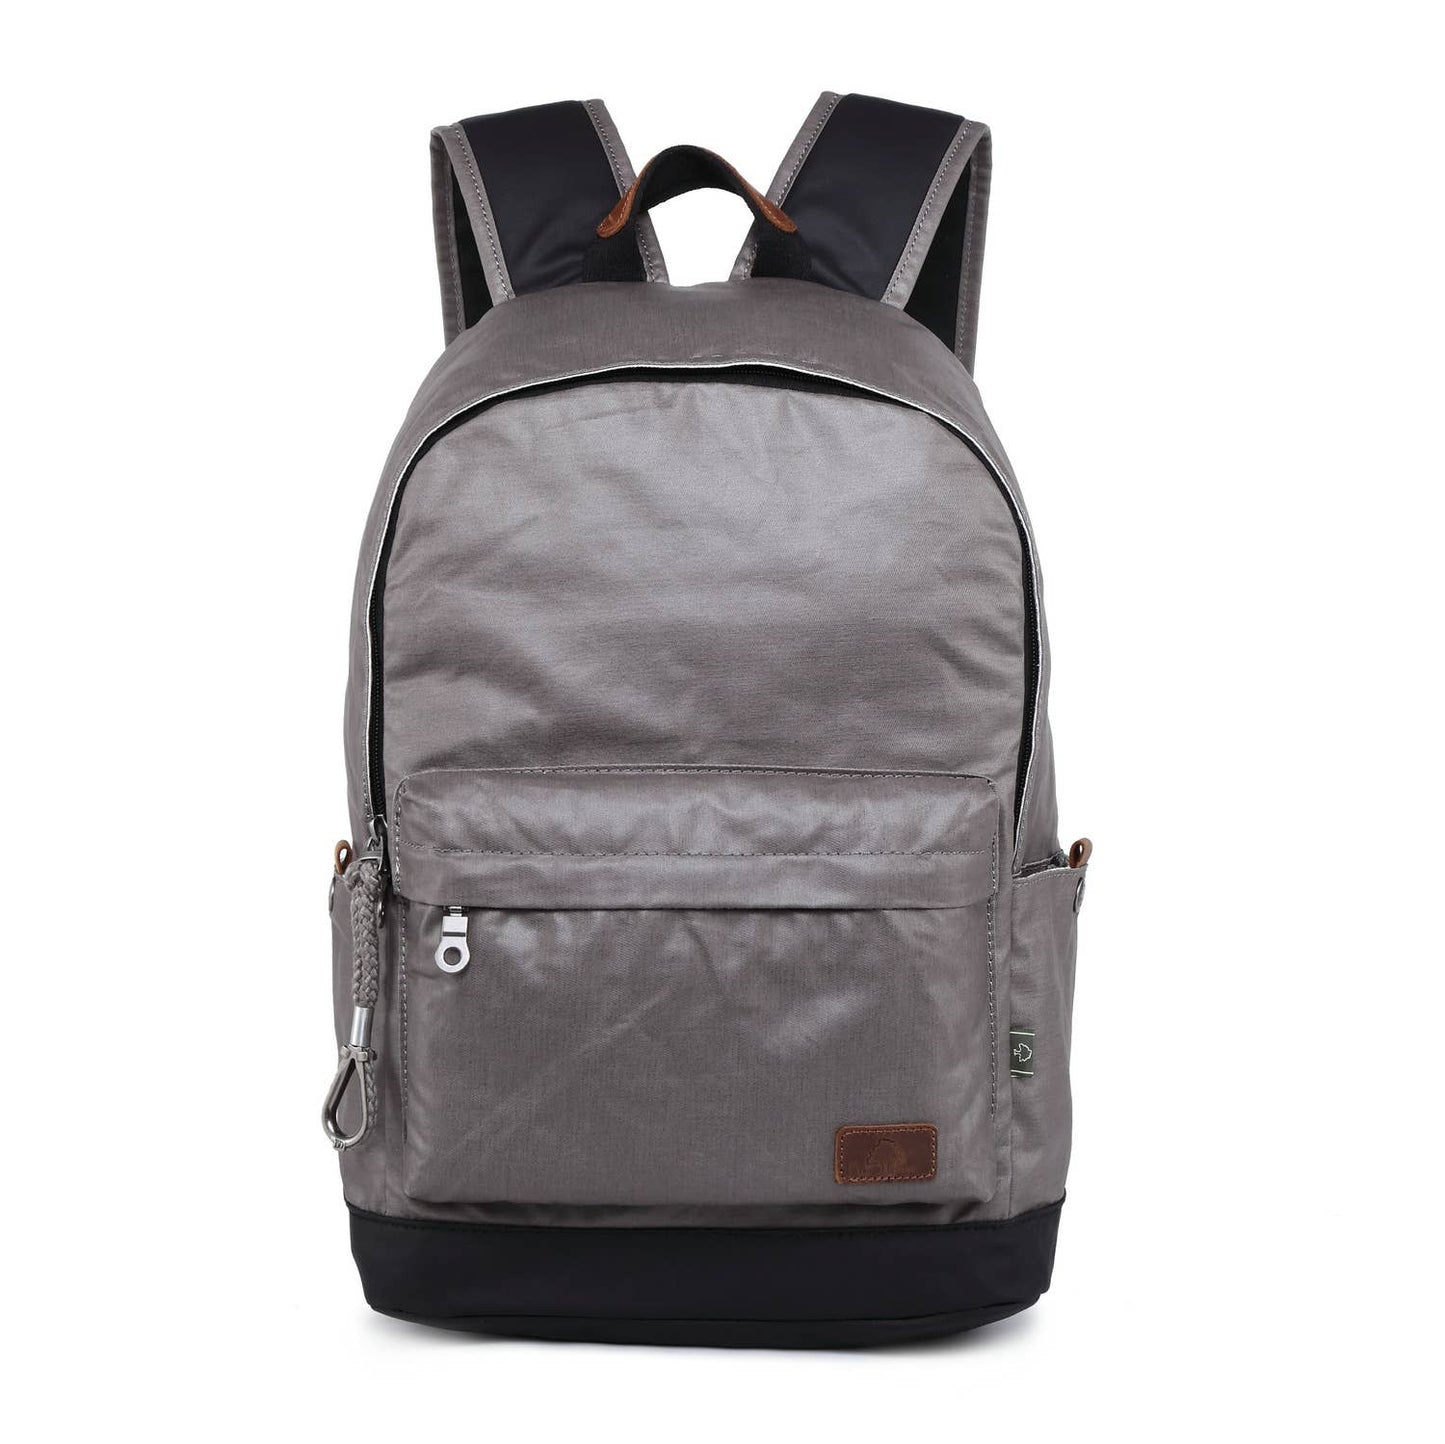 Urban Light Leather Backpack - Grey